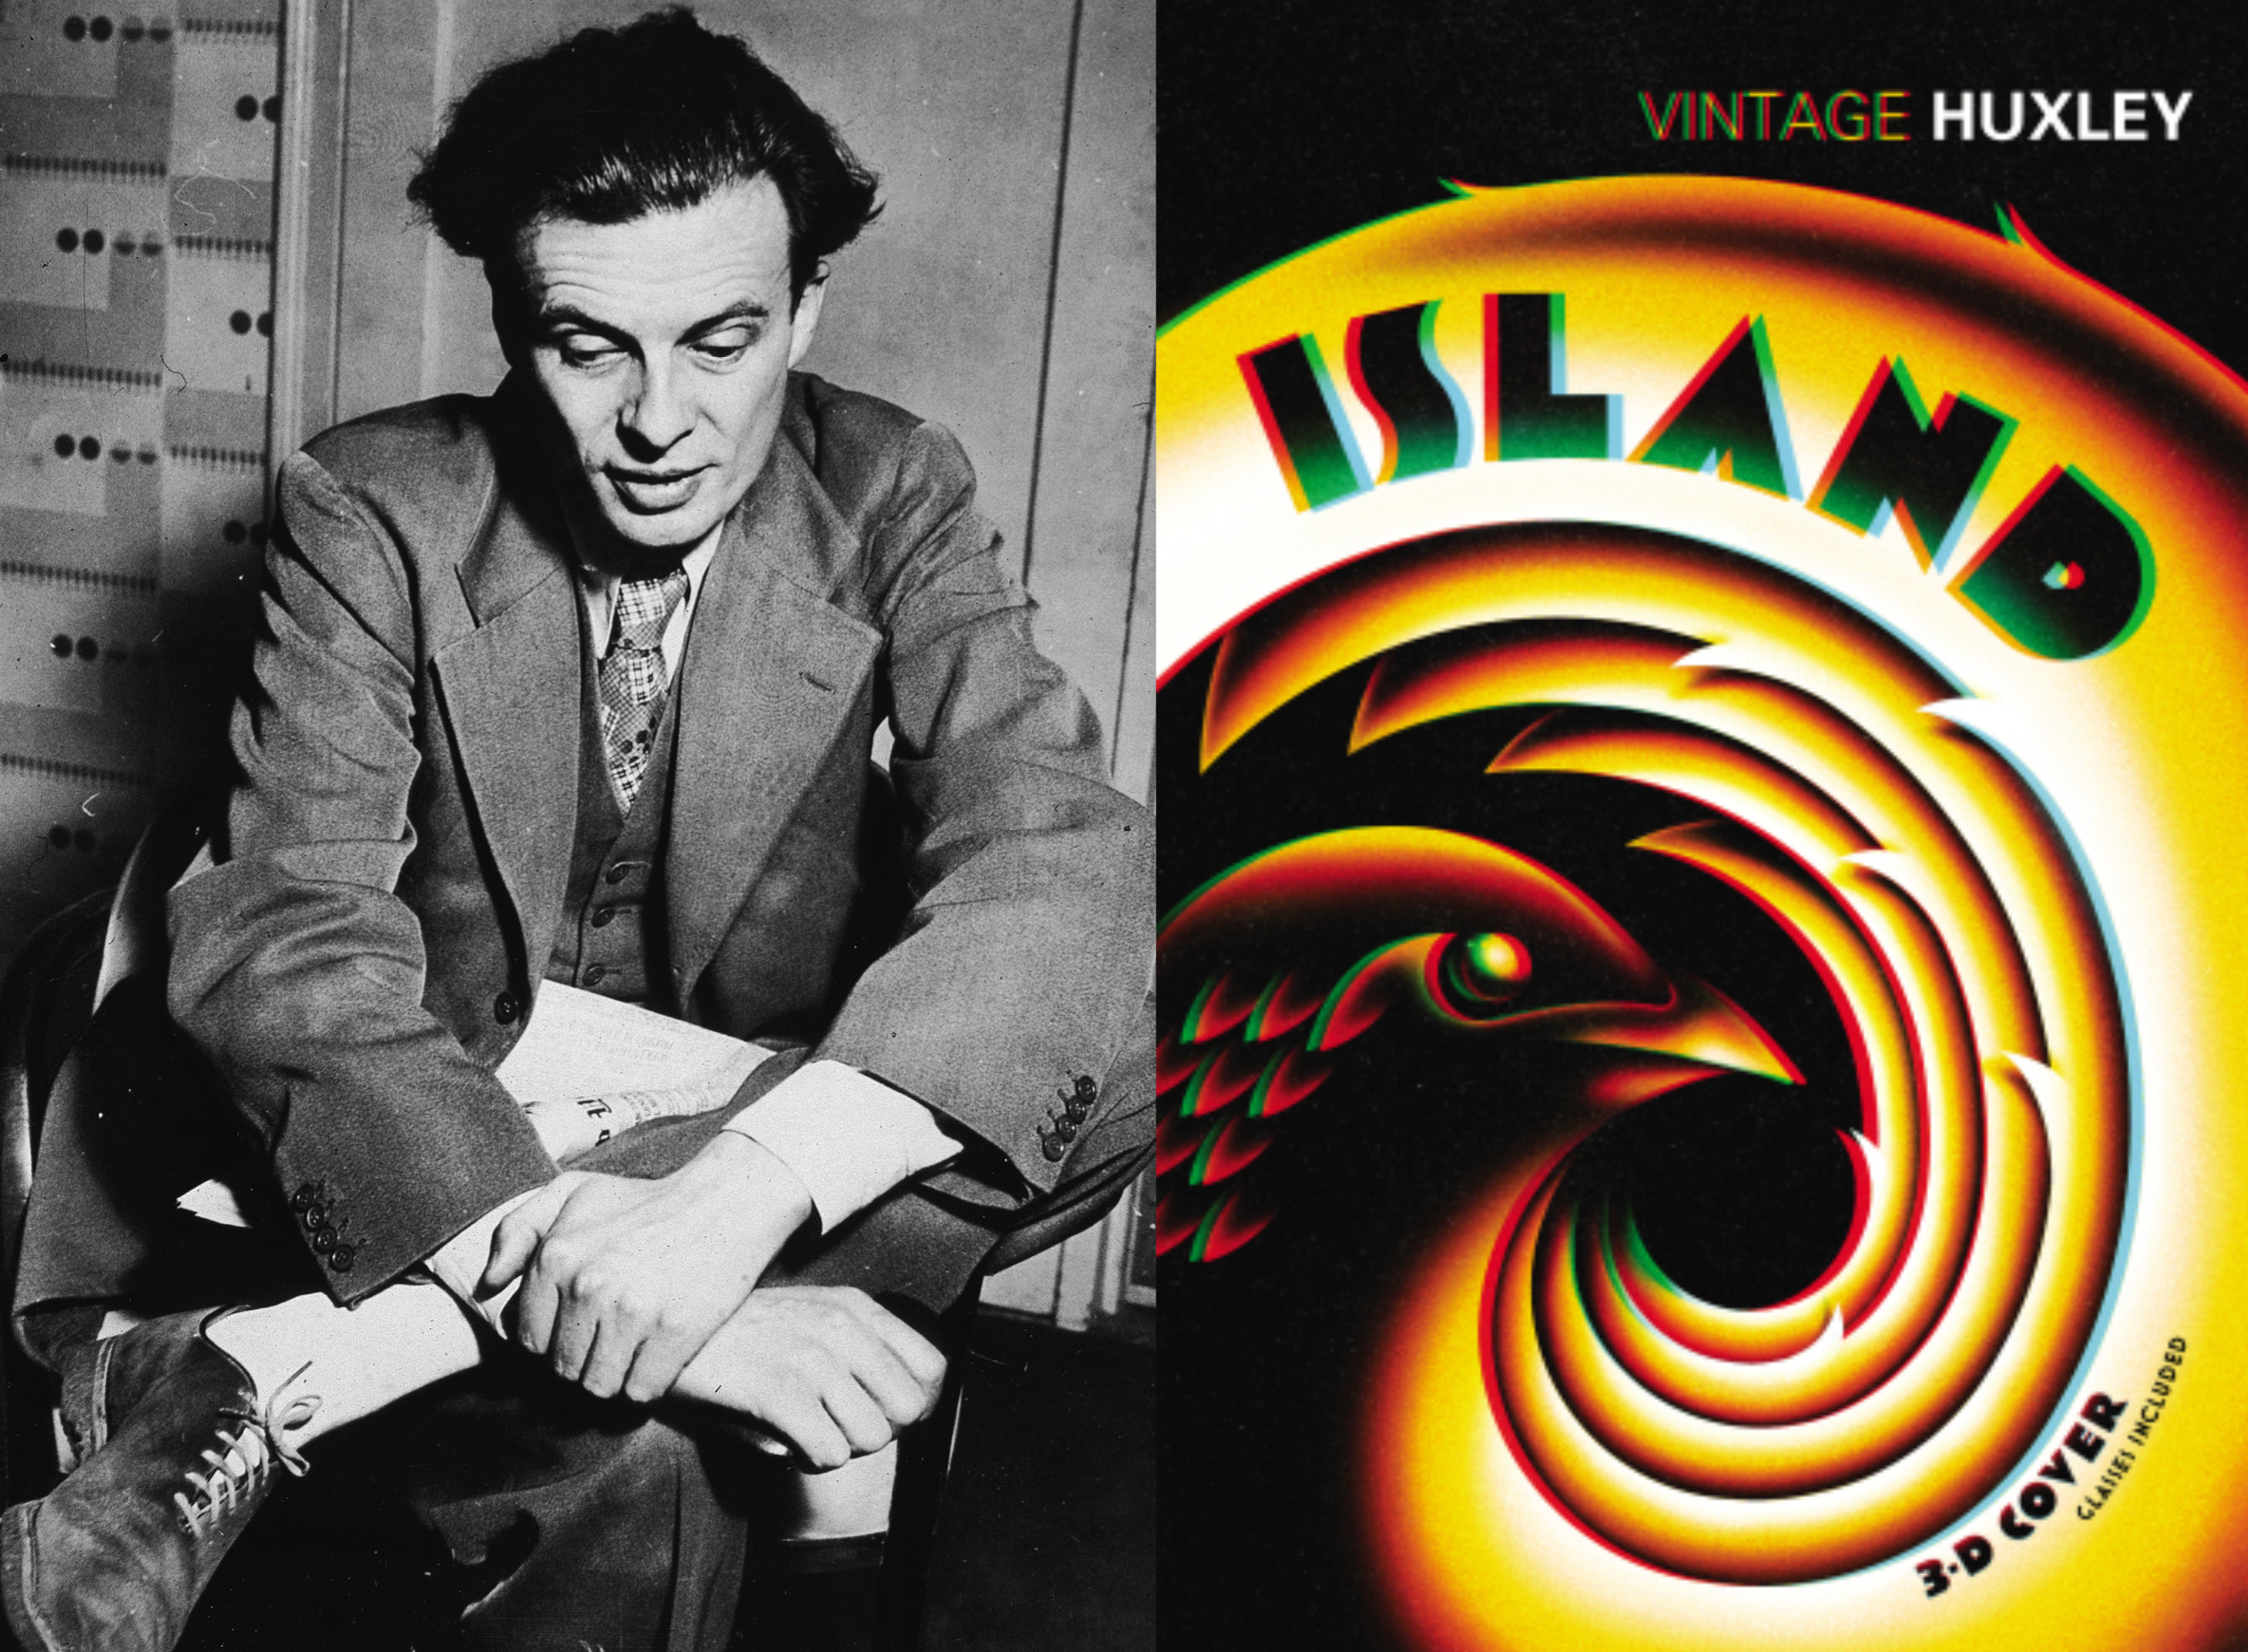 Aldous Huxley in the 1930s and cover detail of the 2016 Vintage edition of his final novel ‘Island’